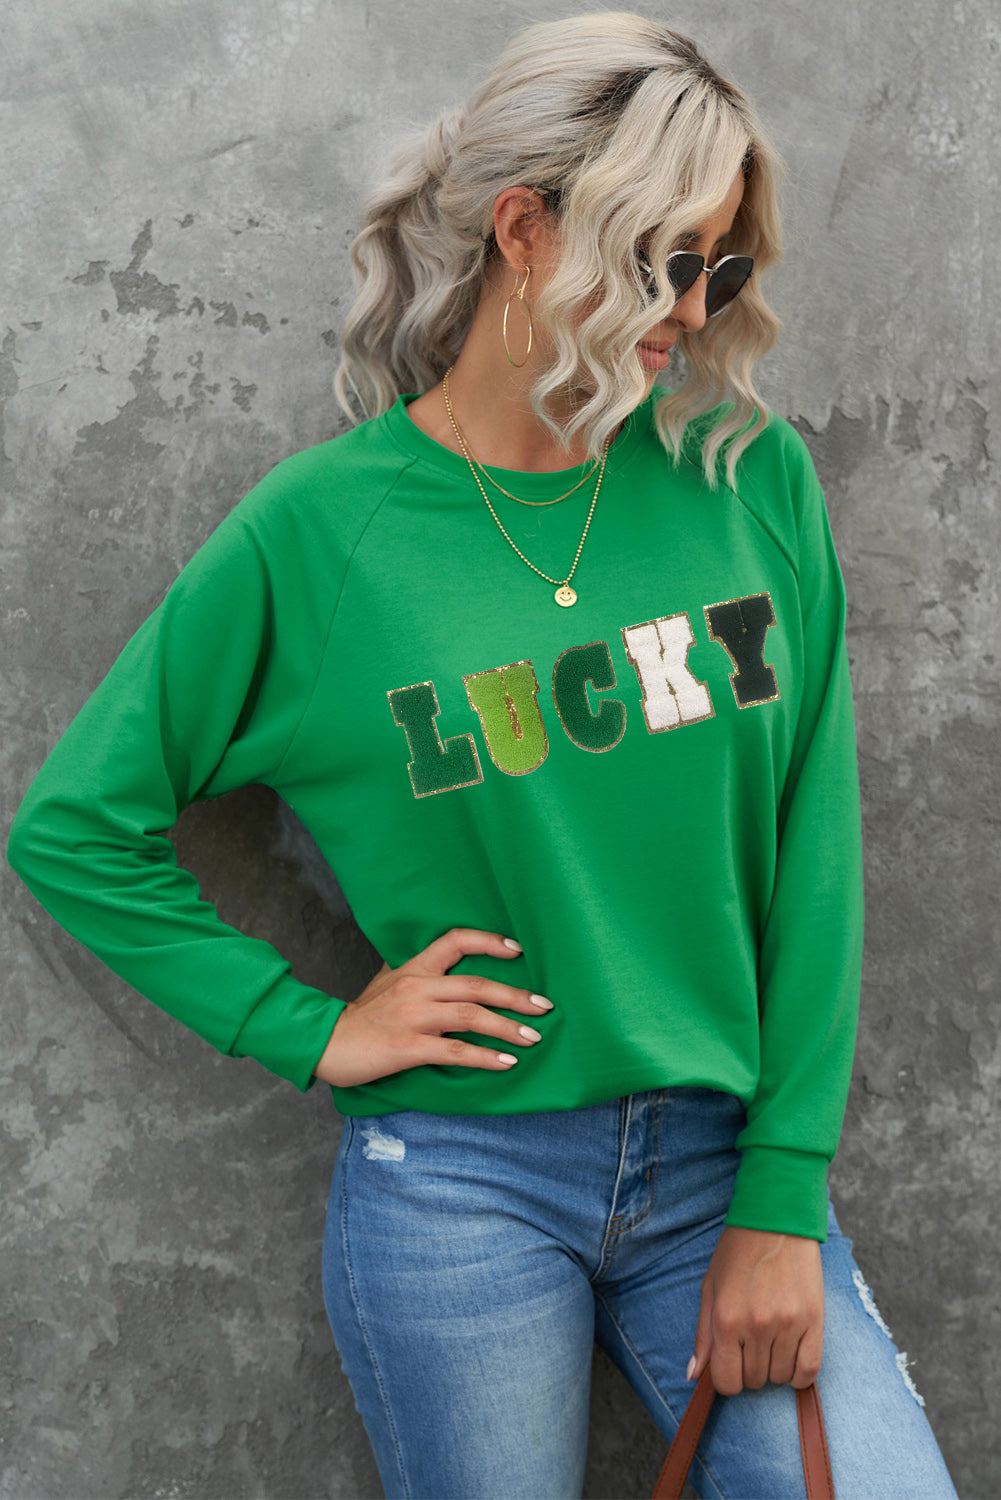 Green St Patricks LUCKY Chenille Embroidered Graphic Sweatshirt